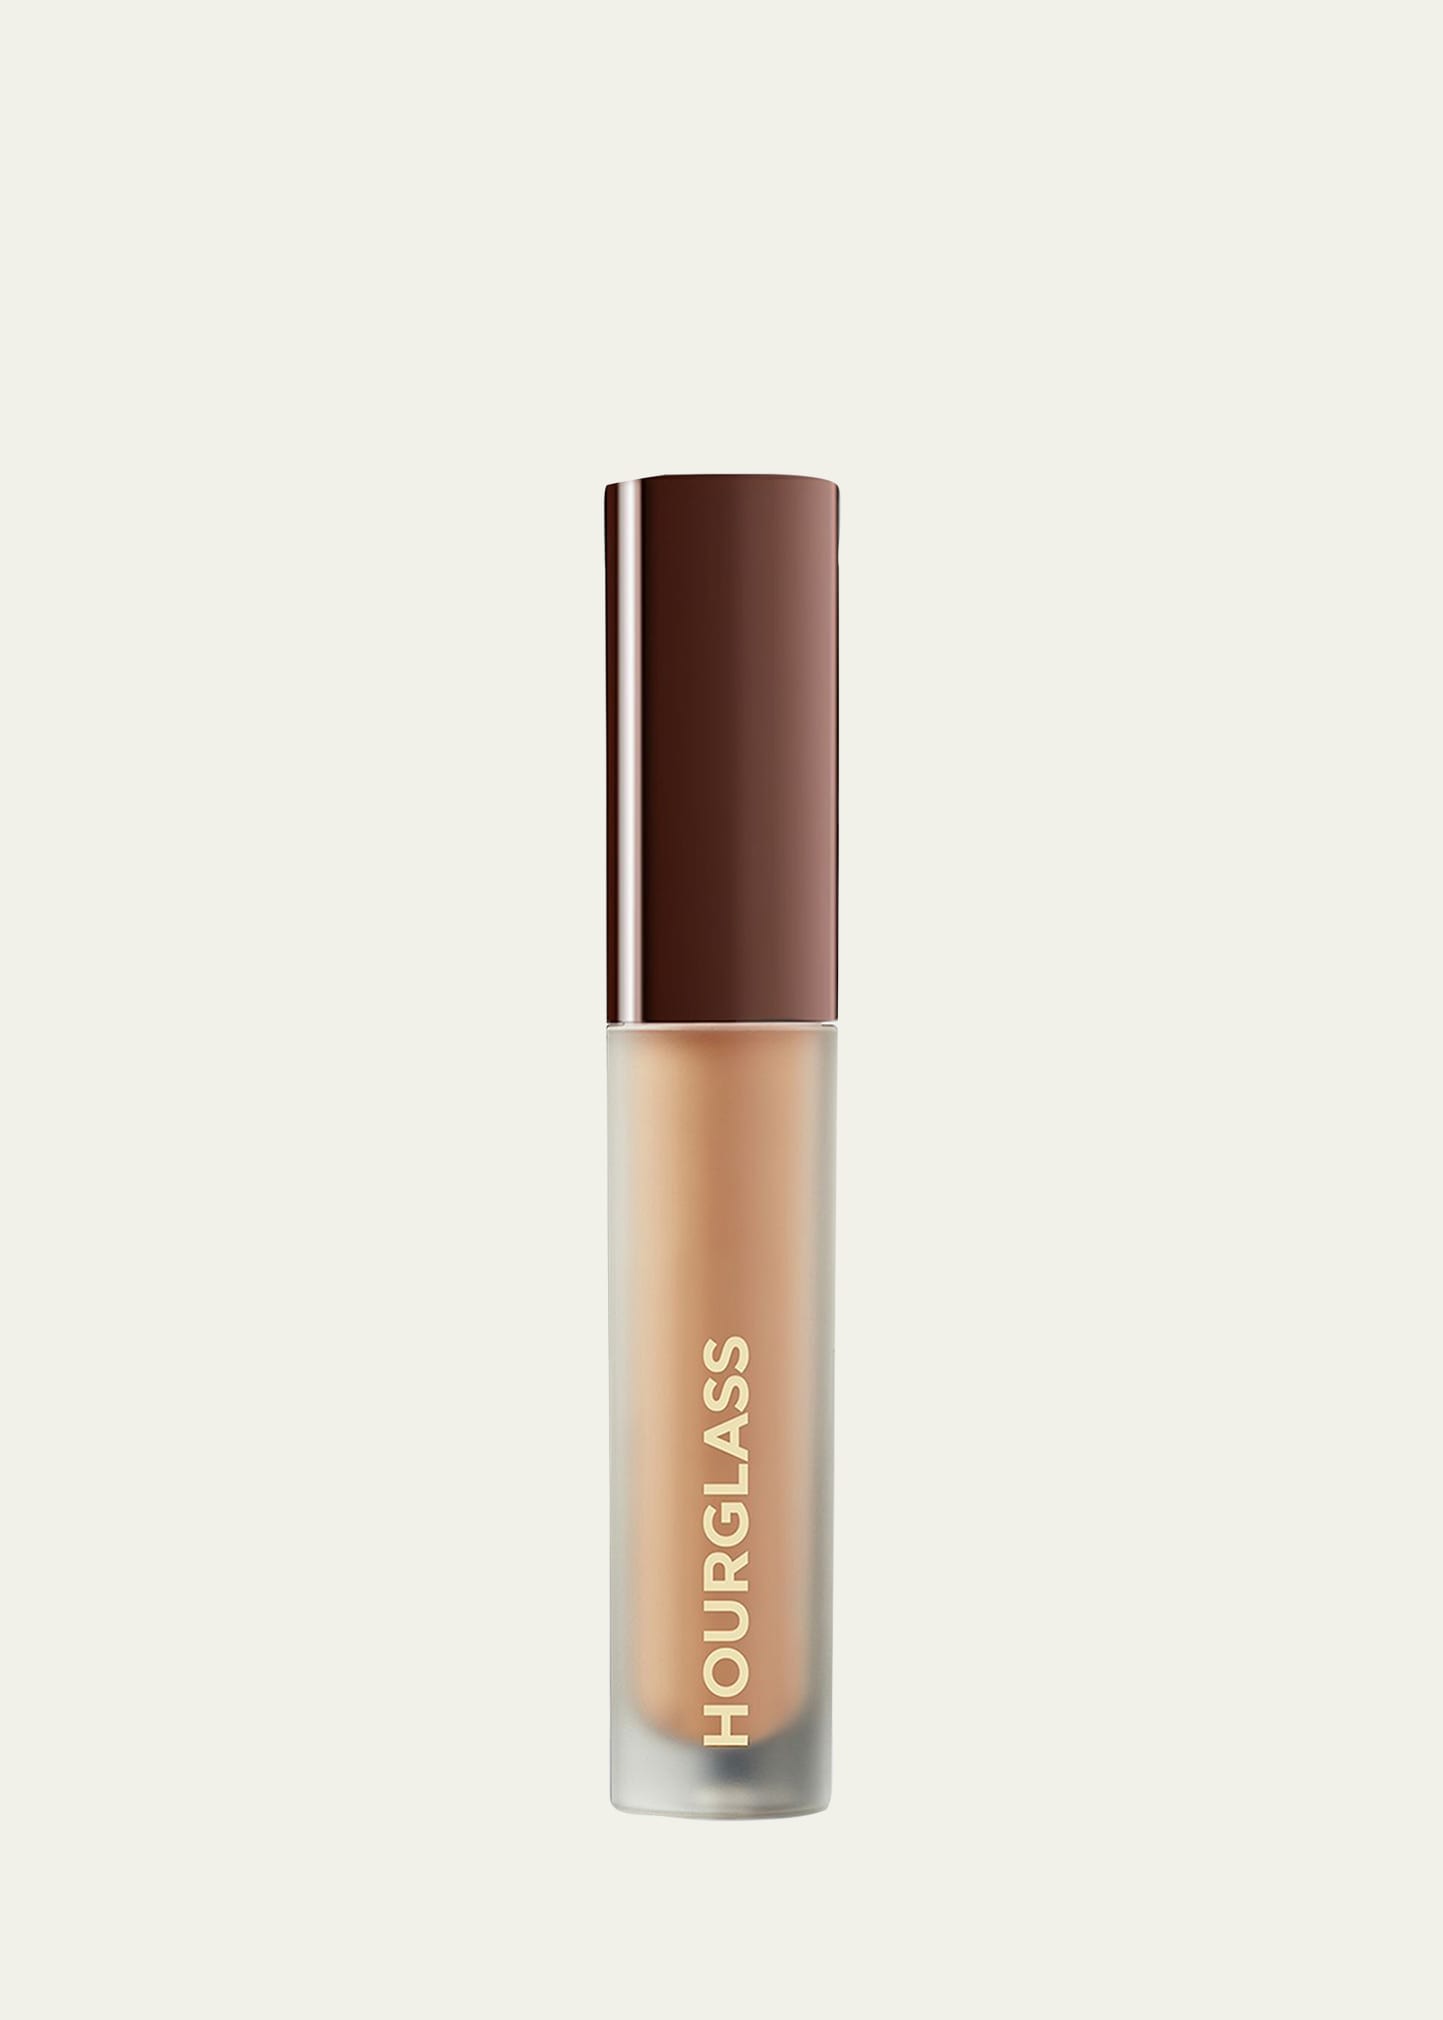 Hourglass Vanish Airbrush Concealer - Travel Size In Sepia 5